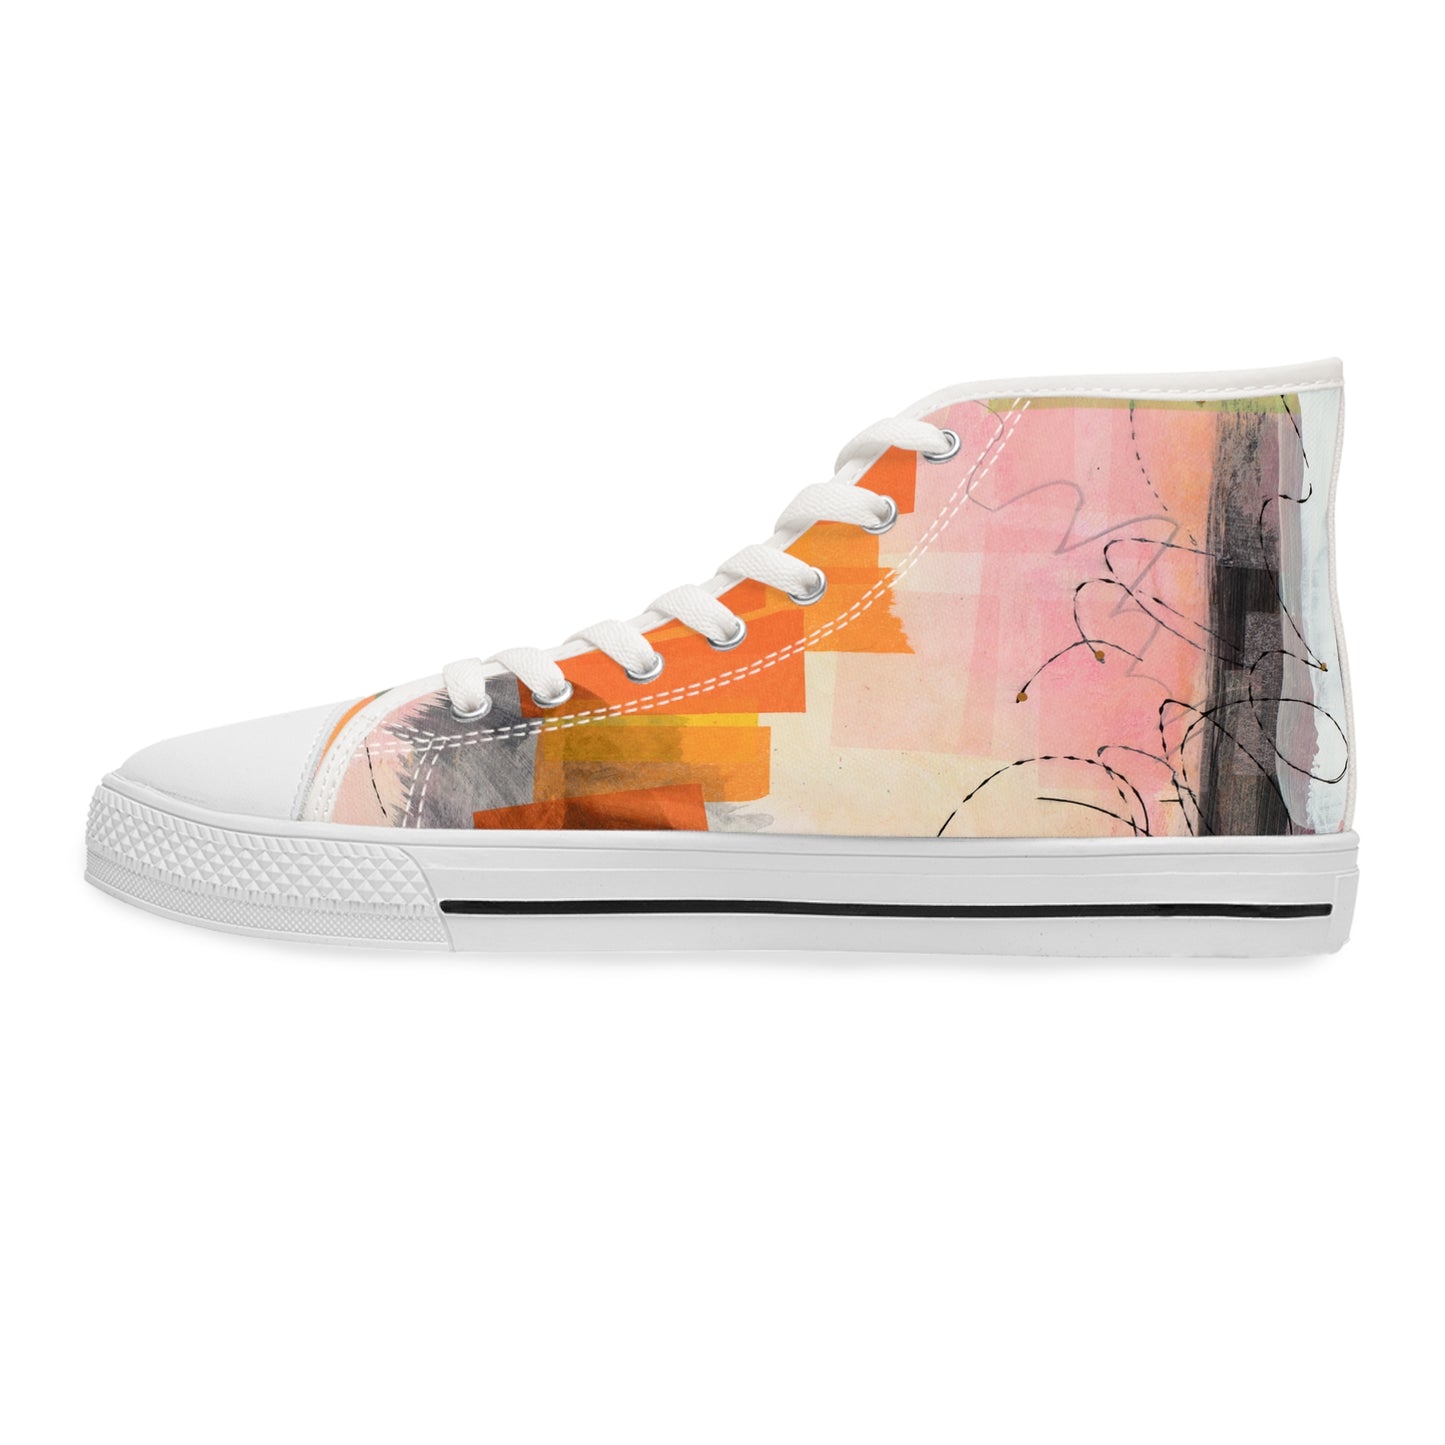 Women's High Top Sneakers - 02869 US 12 White sole